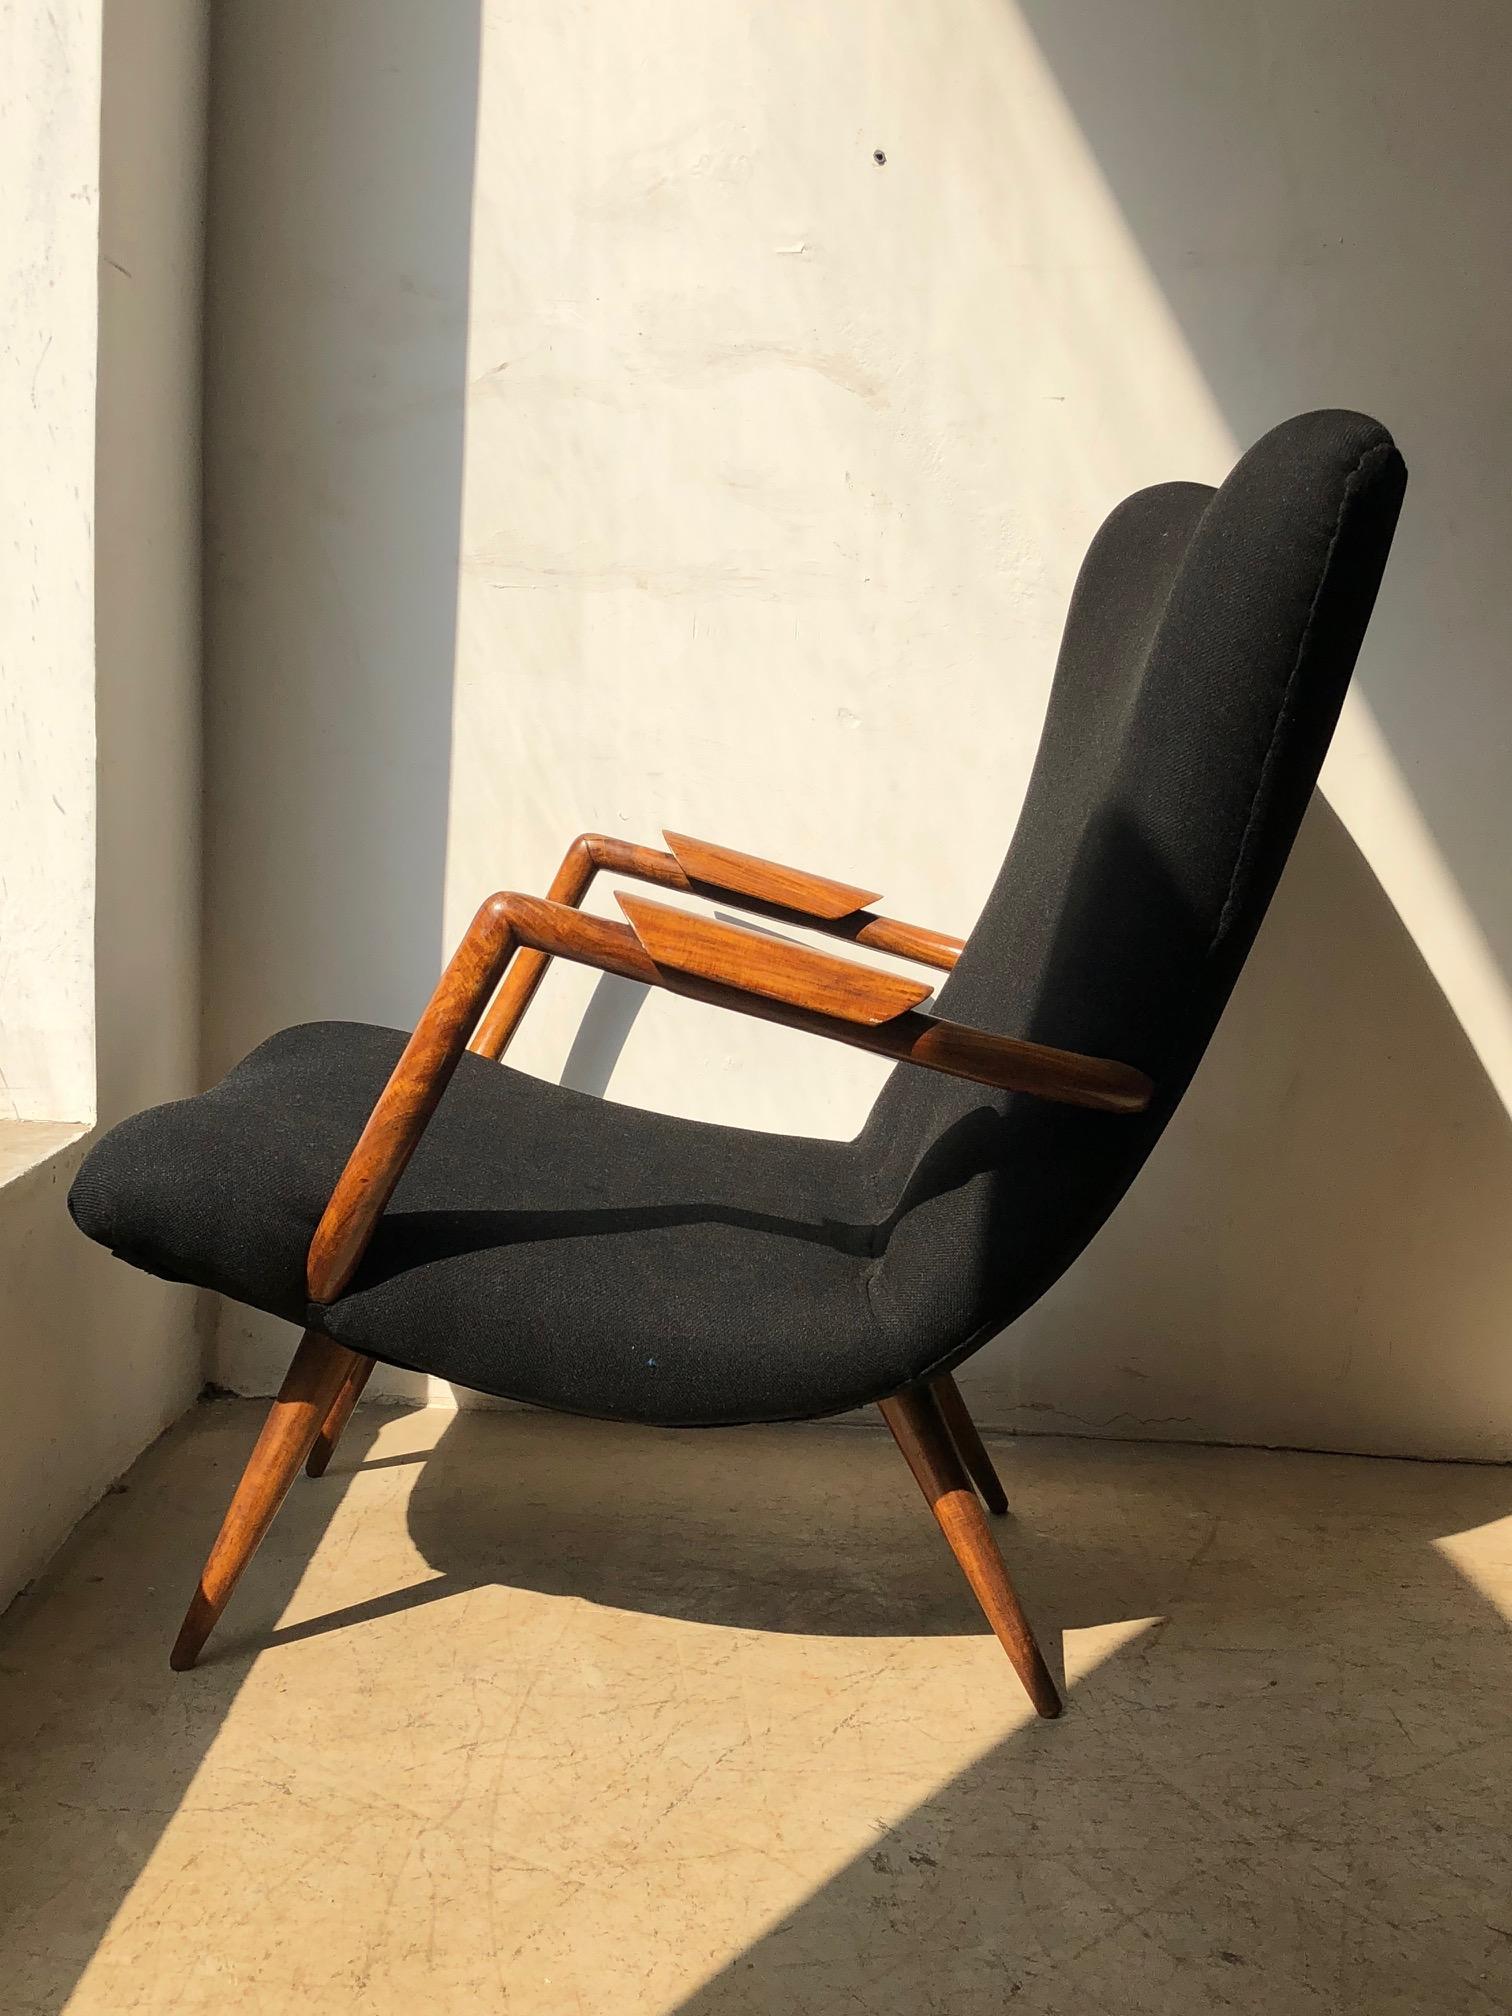 Giuseppe Scapinelli. This is a beautiful example of a Scapinelli`s Classic armchair. An important Brazilian modern design furniture item made of solid caviuna wood structure with black upholstery covering.